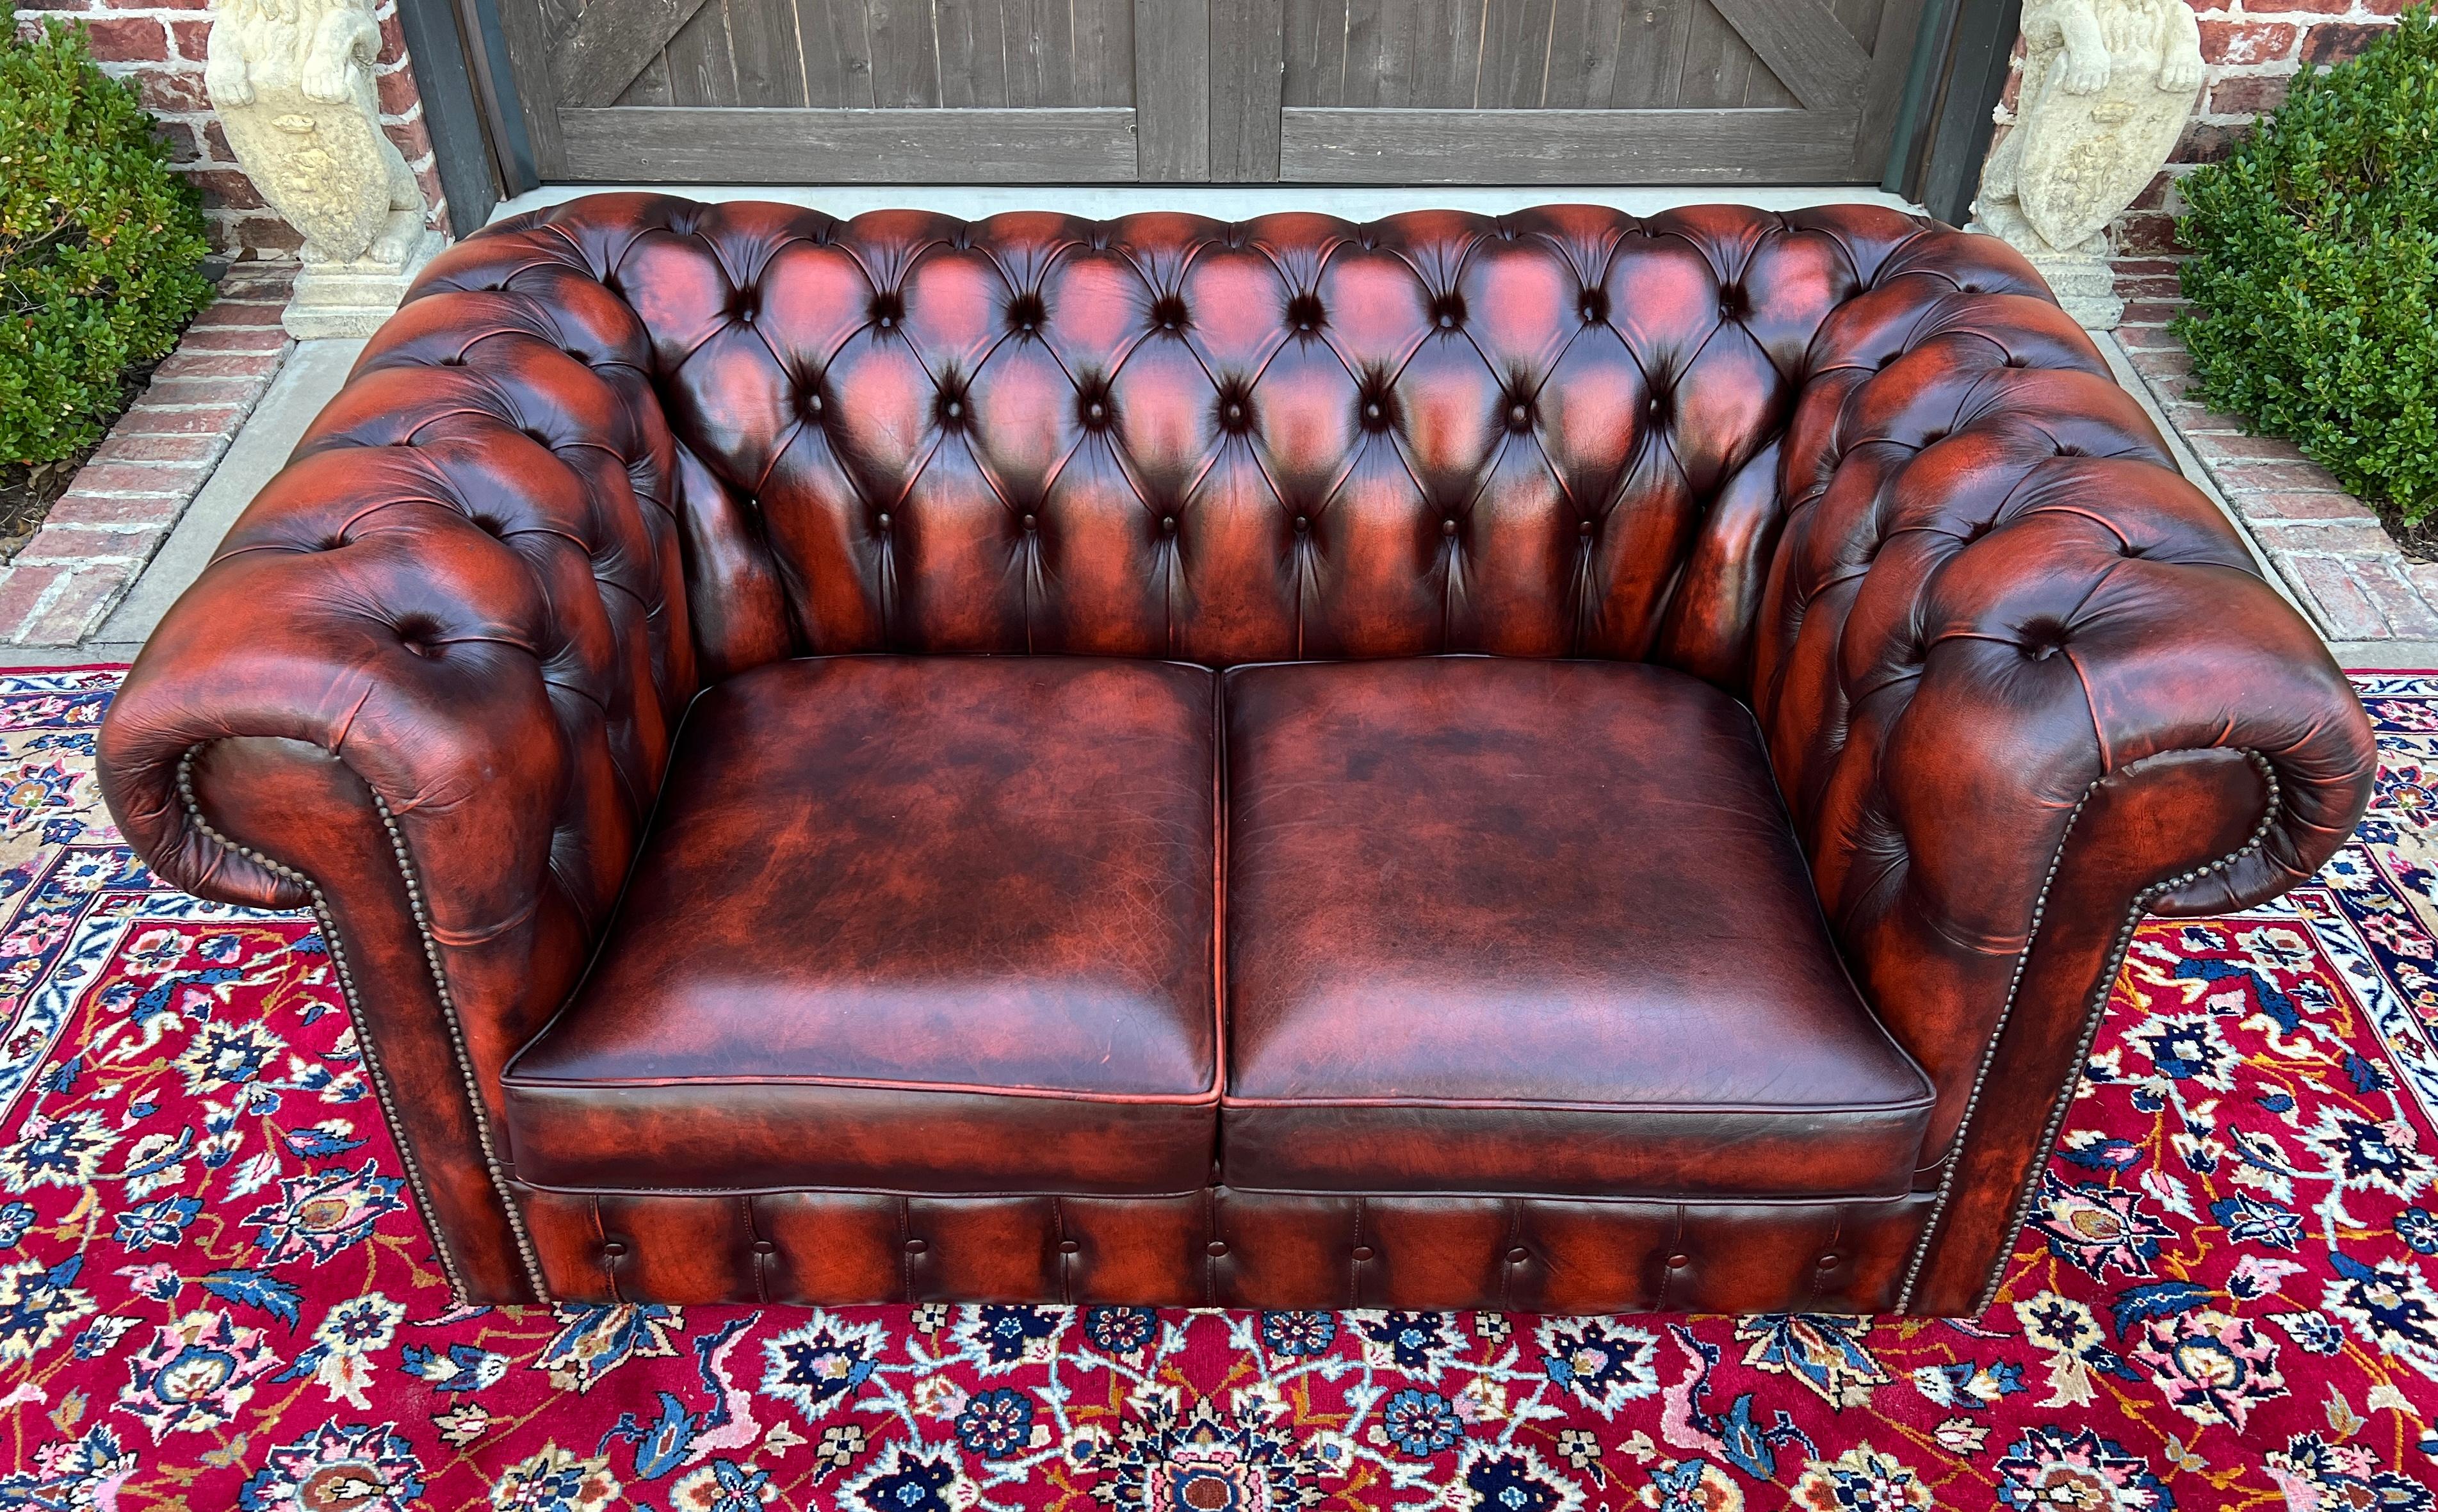 Vintage English Chesterfield Leather Tufted Love Seat Sofa Oxblood Red #2 For Sale 13